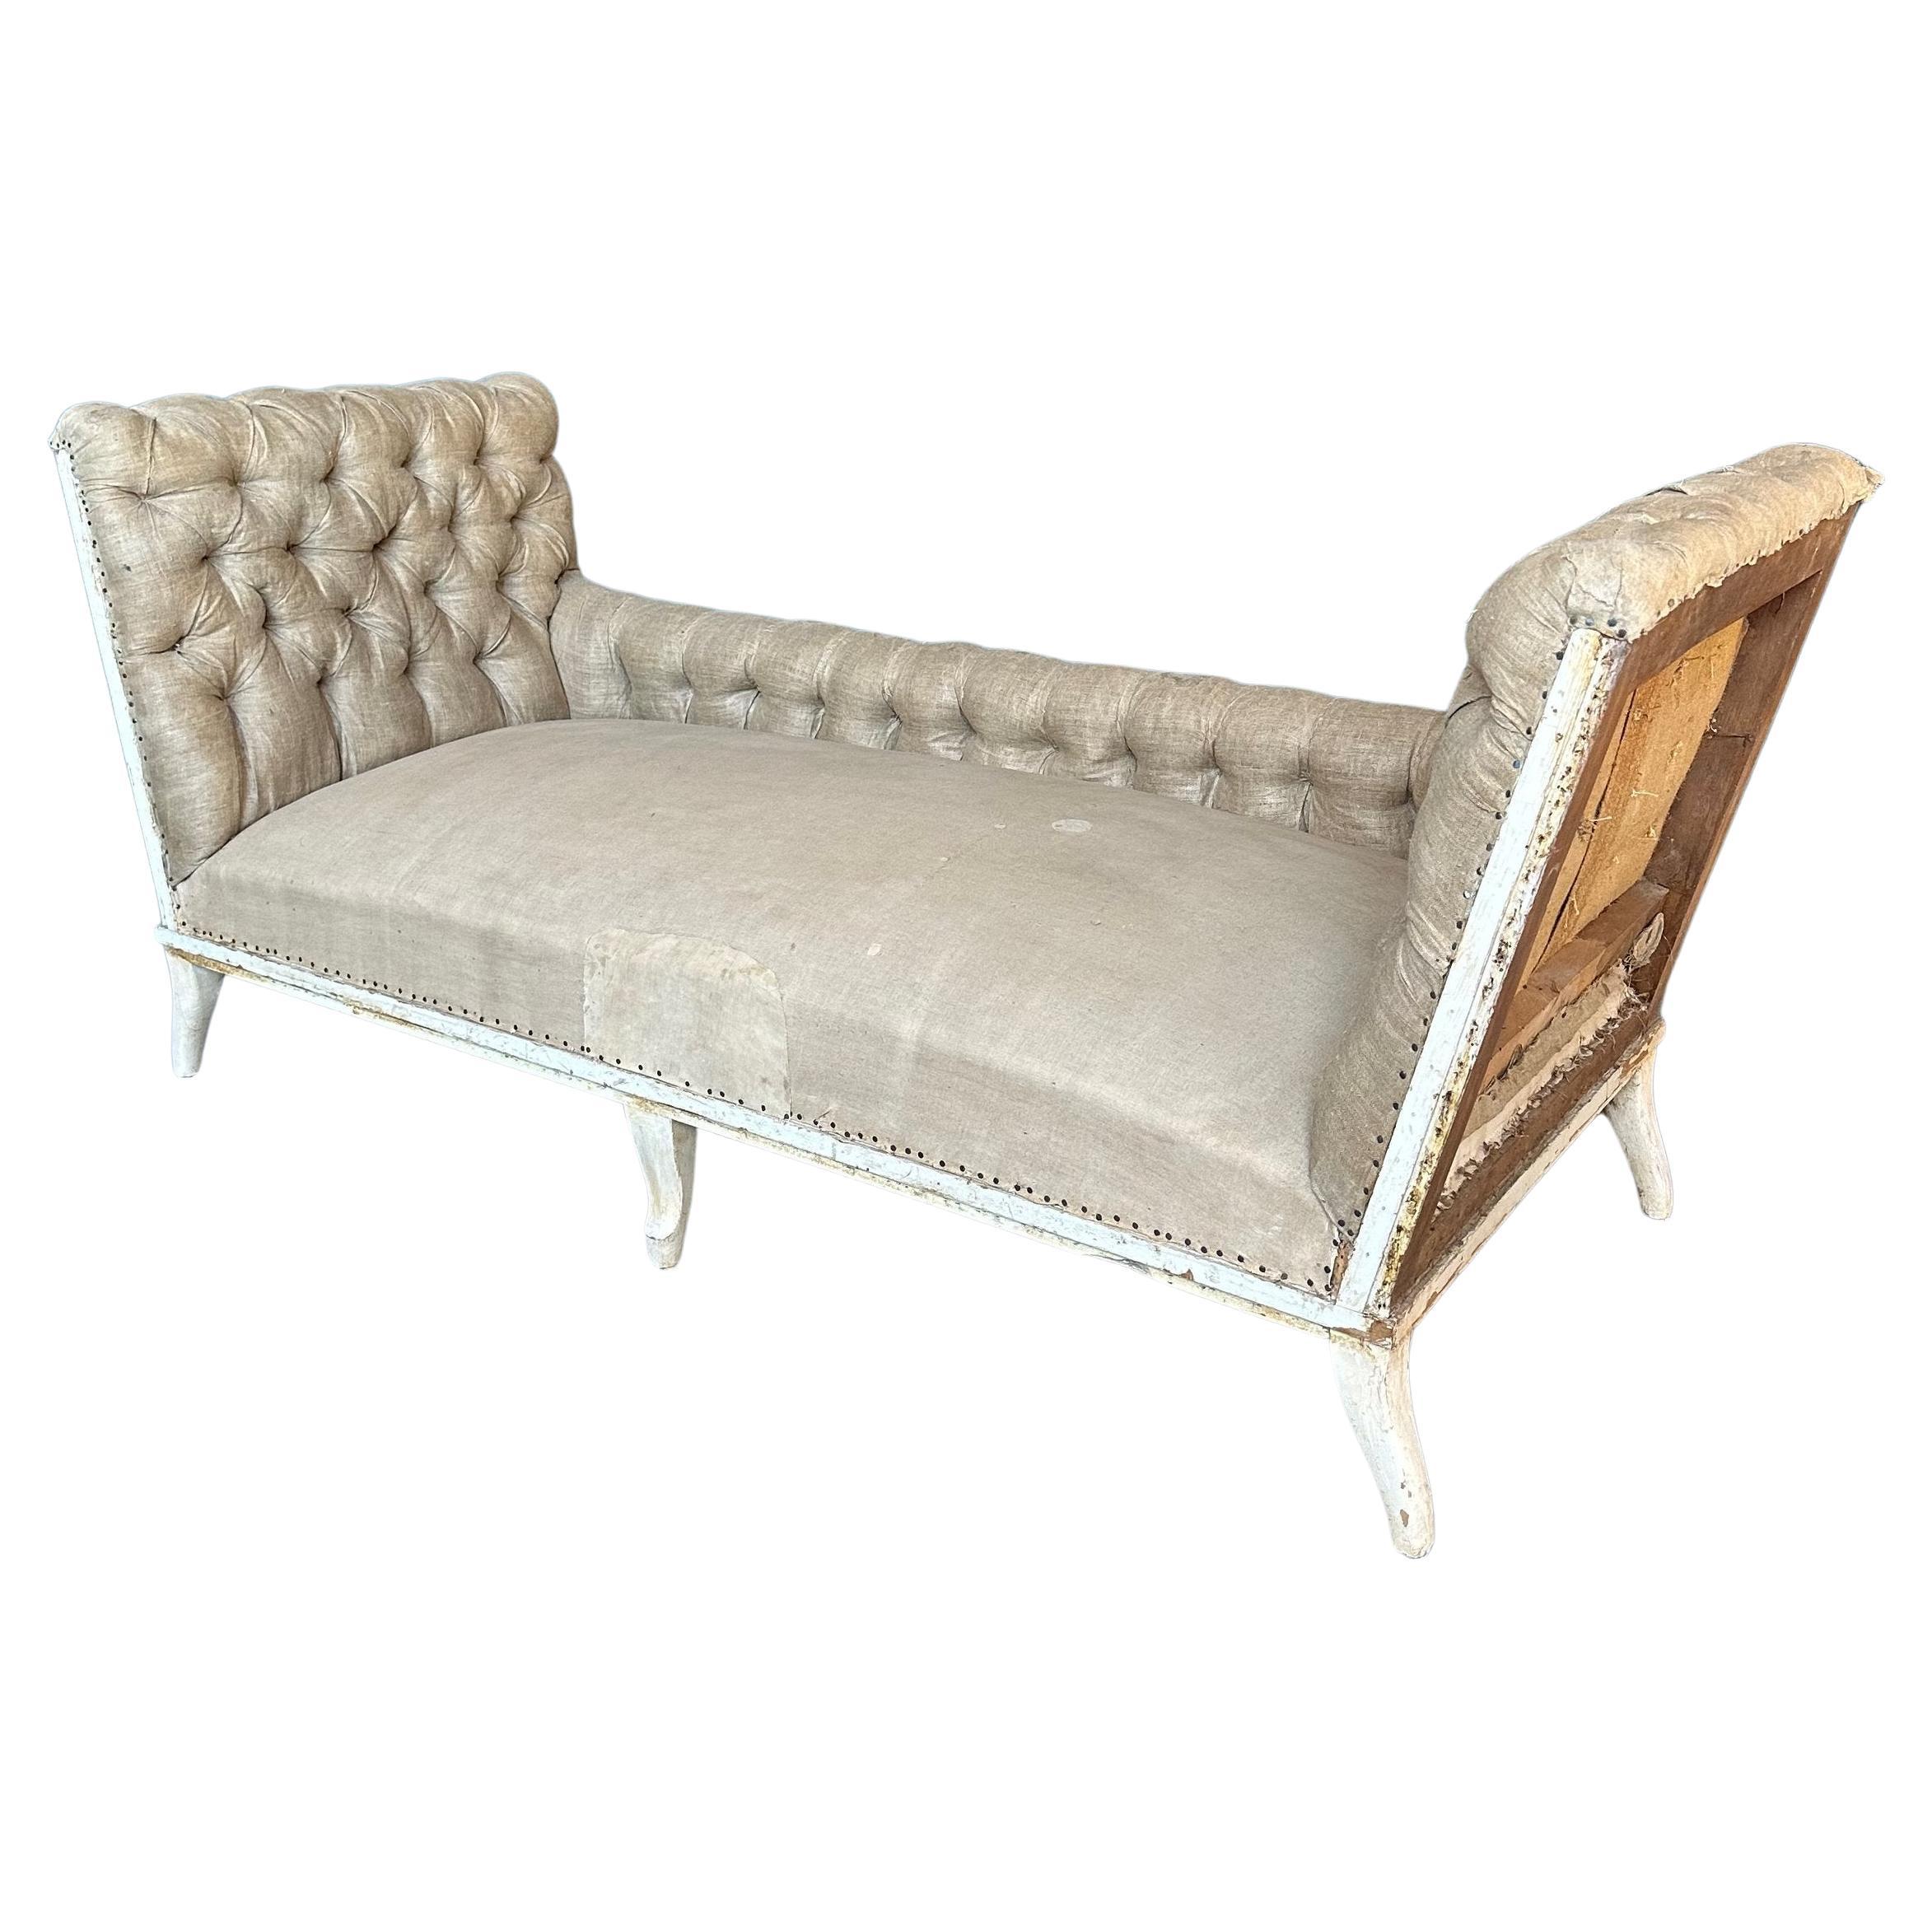 Large French Tufted Napoleon III Sofa with Extended Arms For Sale